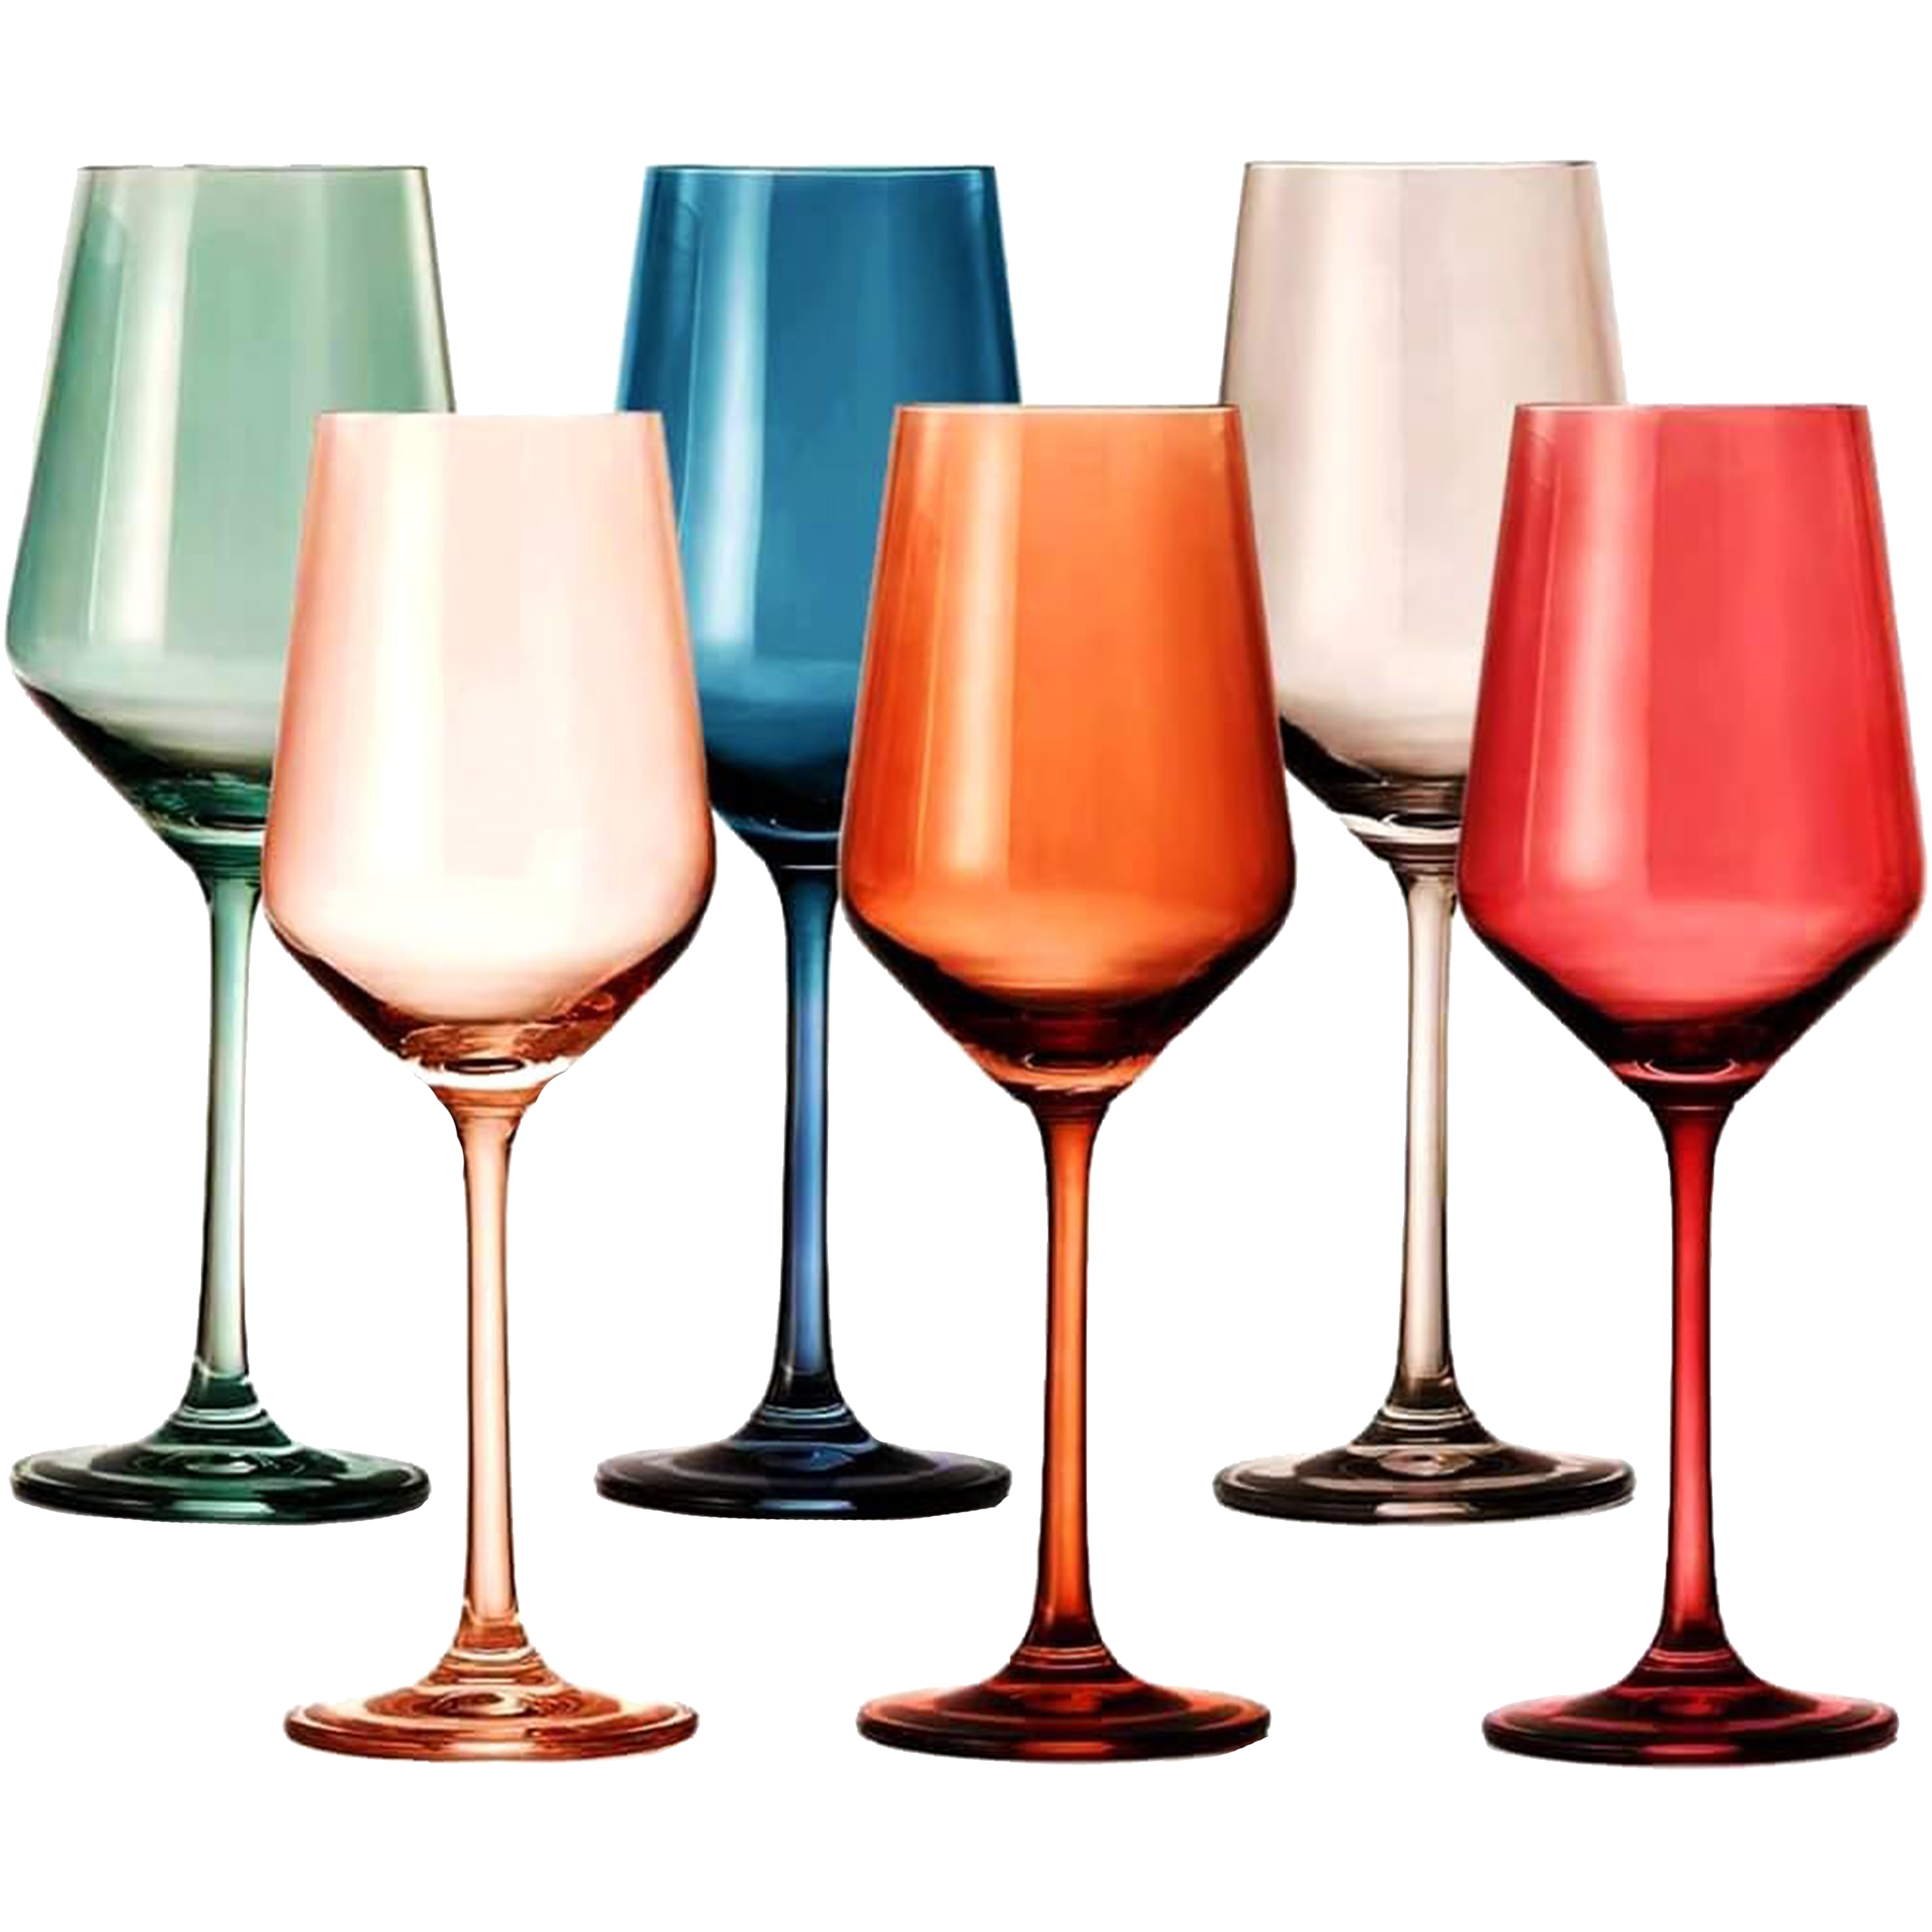 ColoVie Stemless Wine Glasses Set of 6, Colored Wine Glass, Old Fashioned,  Diamond Shaped, Unique Colorful Tumblers. 10oz. White Red Wine, Whiskey  Glasses, Cocktail, Gifts for Men, Birthday, Party - colovie